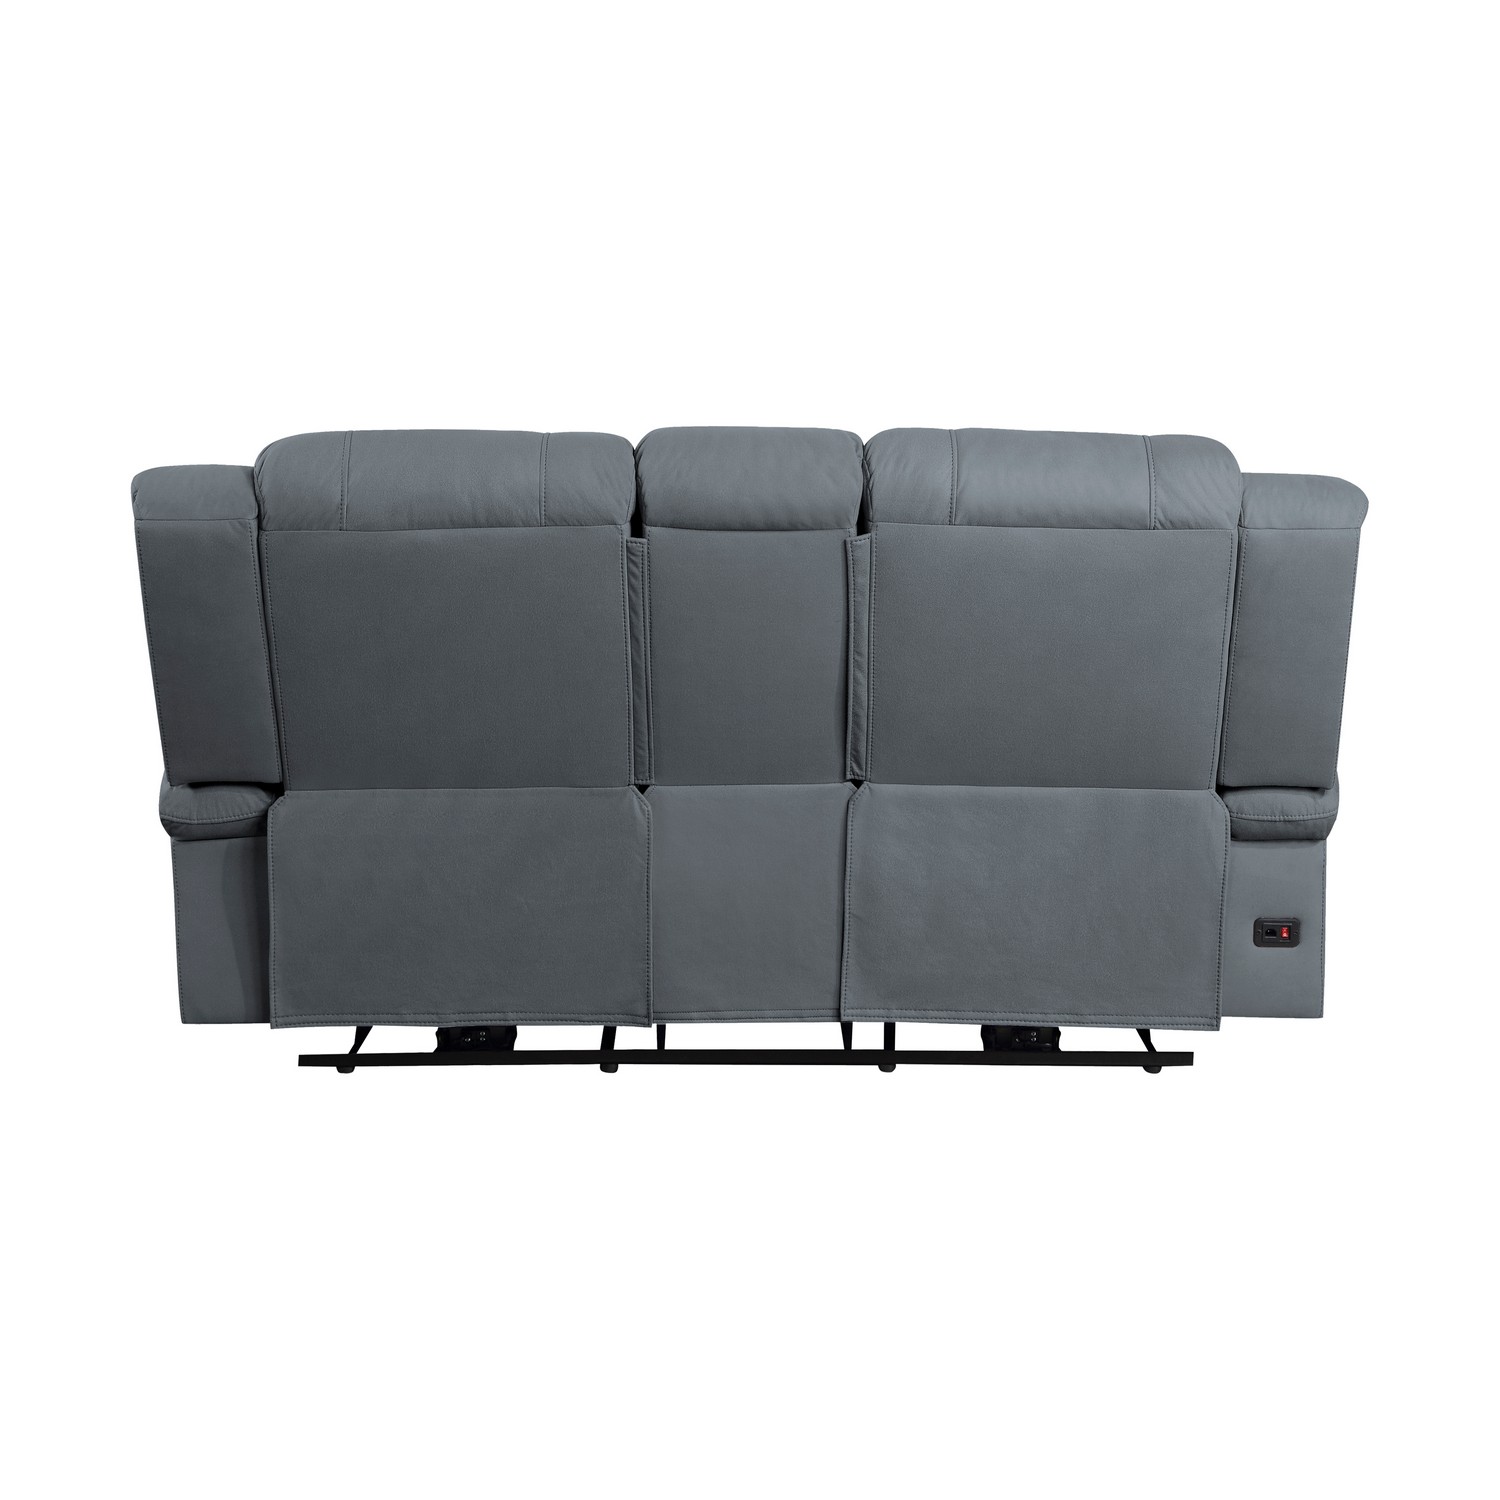 Homelegance Camryn Power Double Reclining Love Seat - Graphite blue